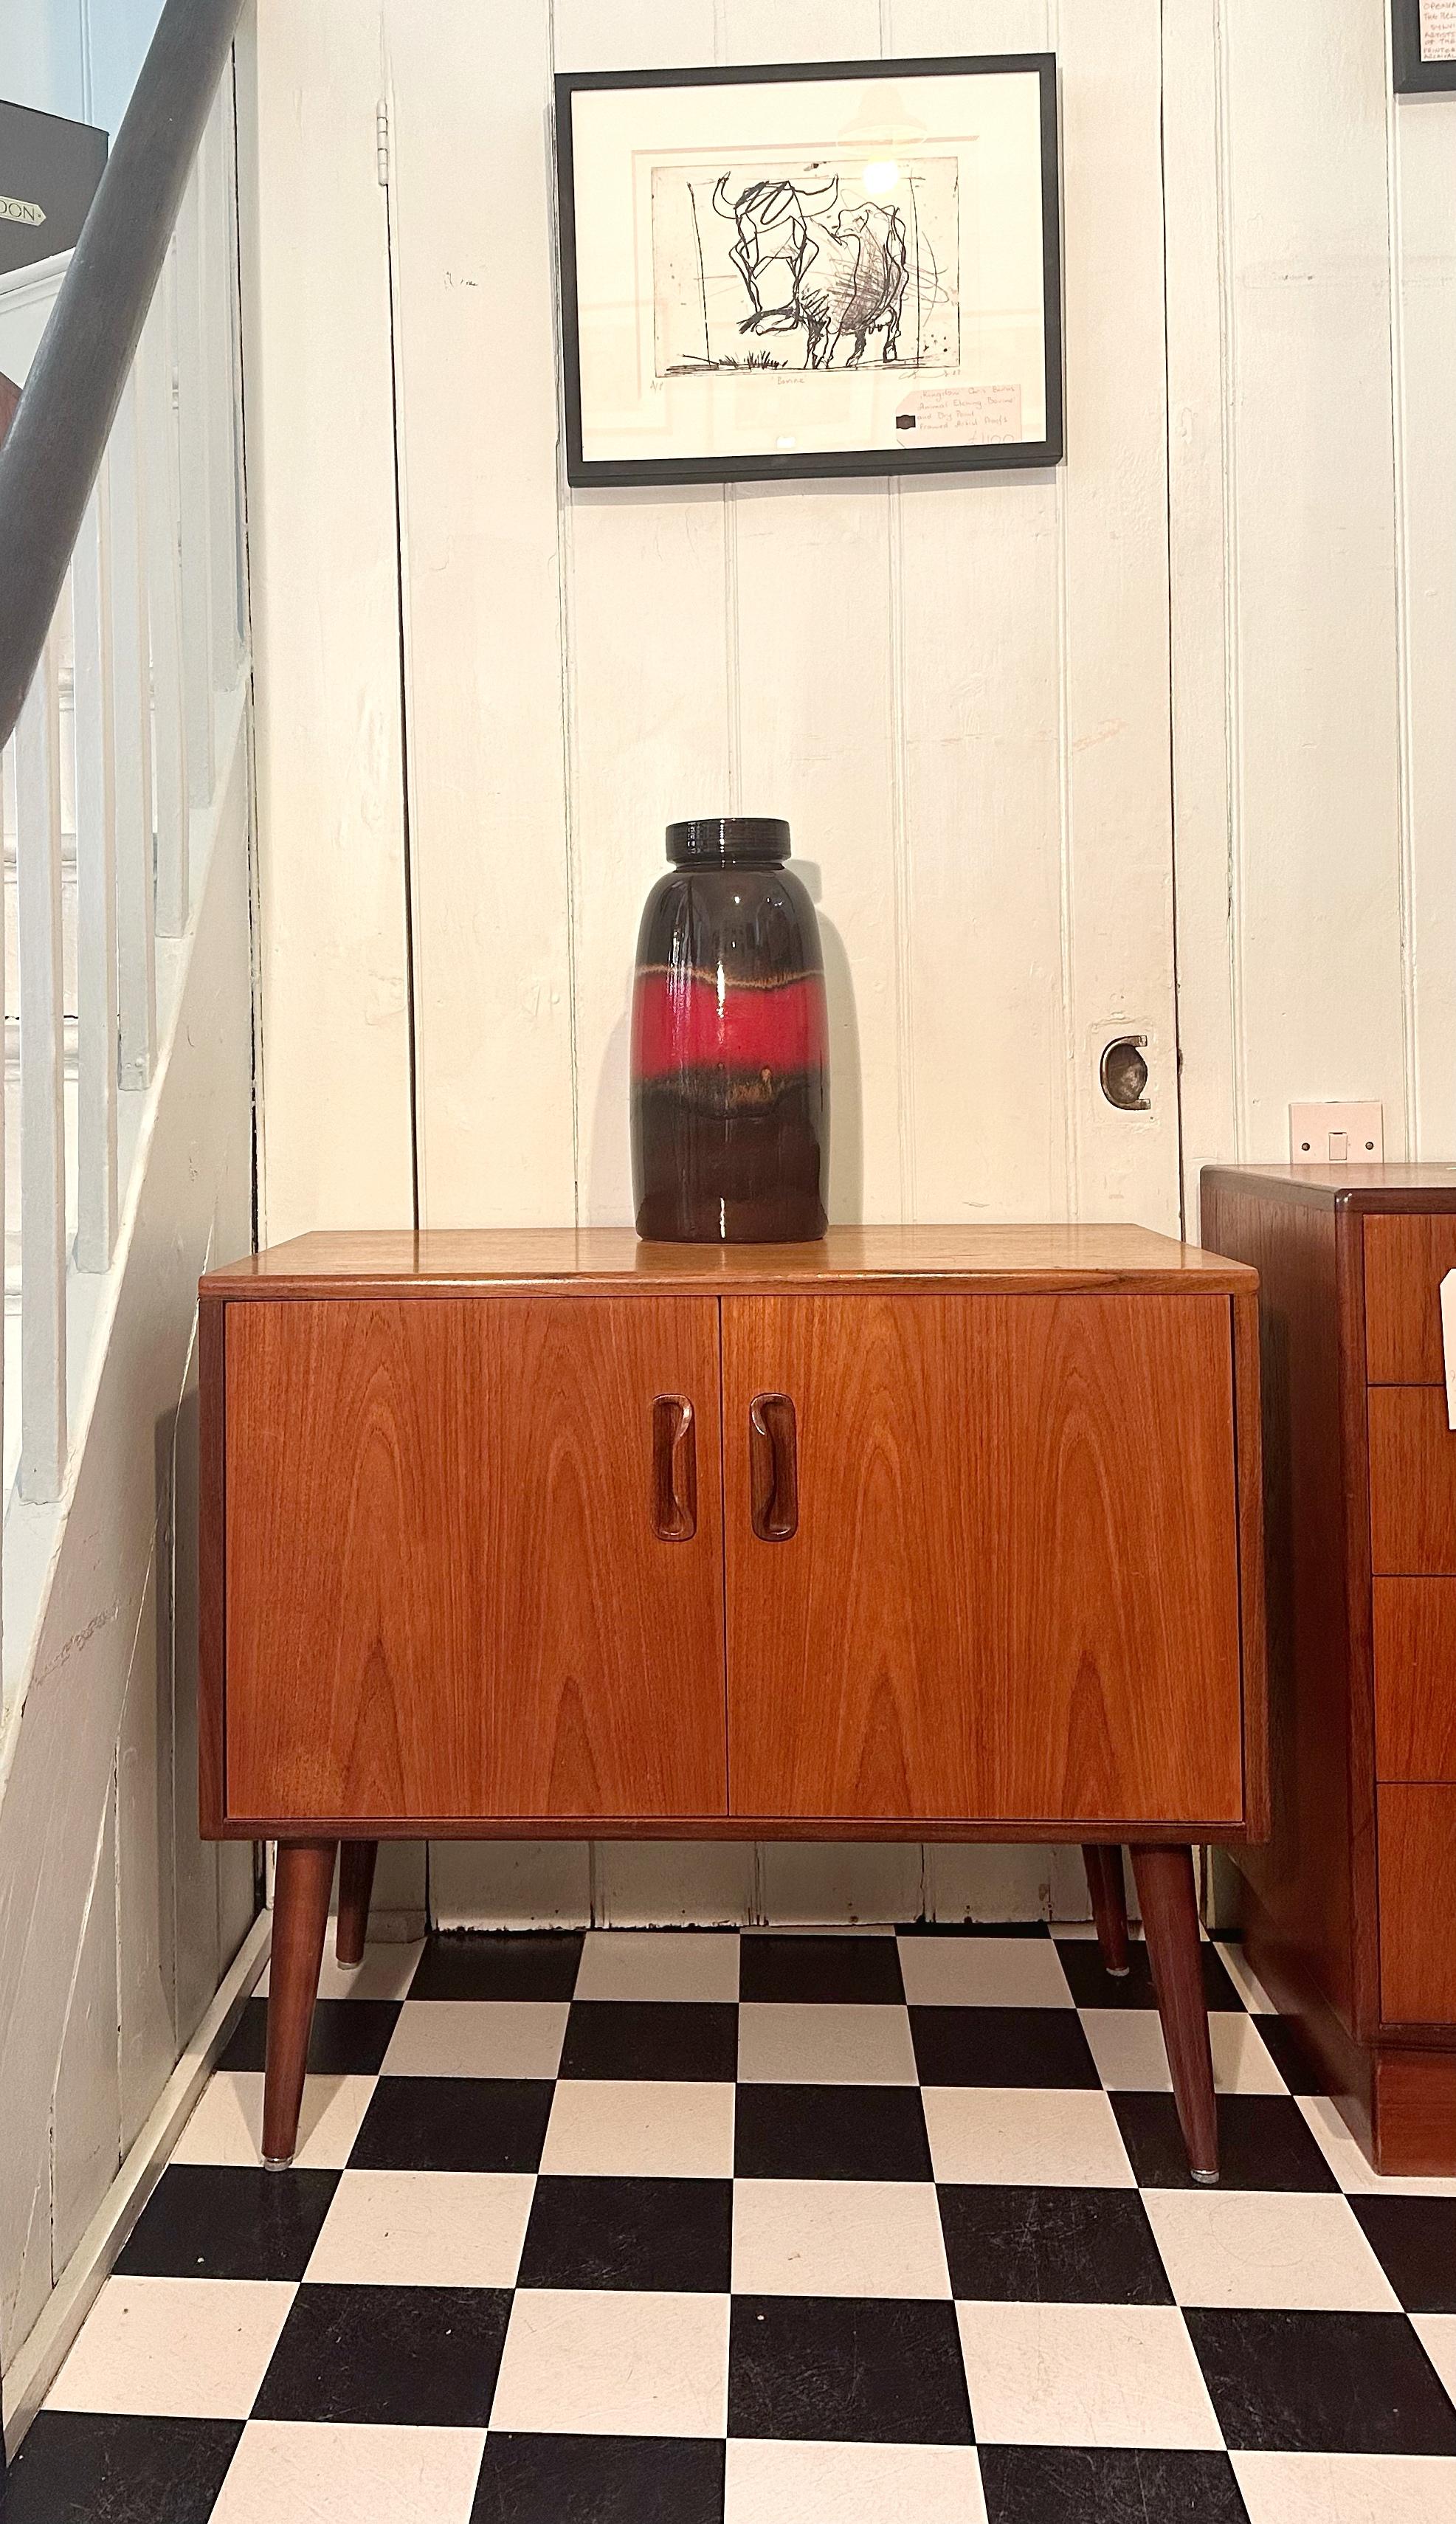 We’re happy to provide our own competitive shipping quotes with trusted couriers. Please message us with your postcode for a more accurate price. Thank you.

Beautiful G Plan Fresco mid century modern vinyl/record/storage cabinet. 
Beautiful teak